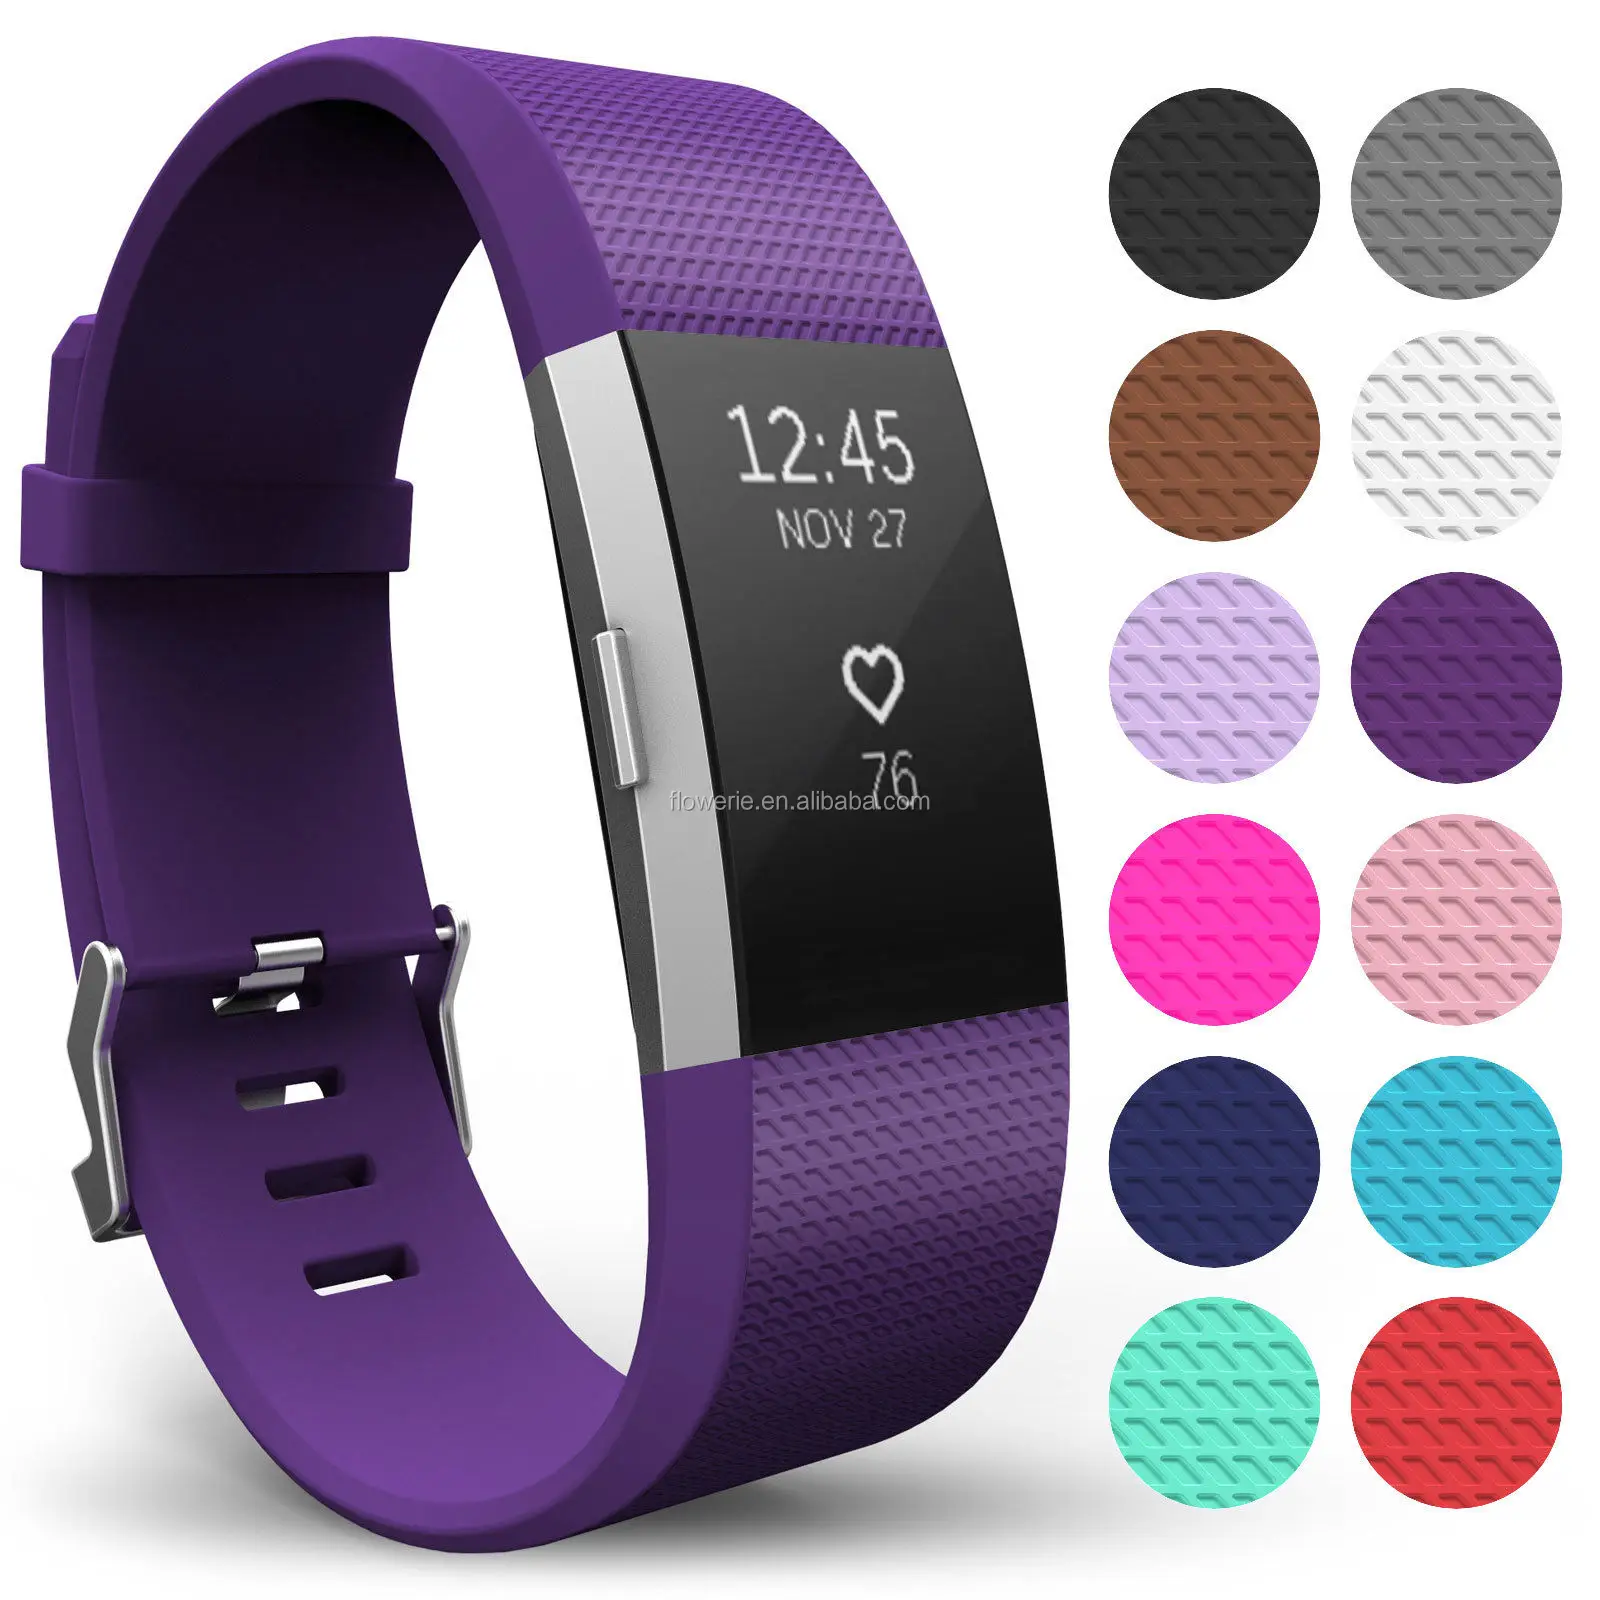 fitbit charge 2 fob watch